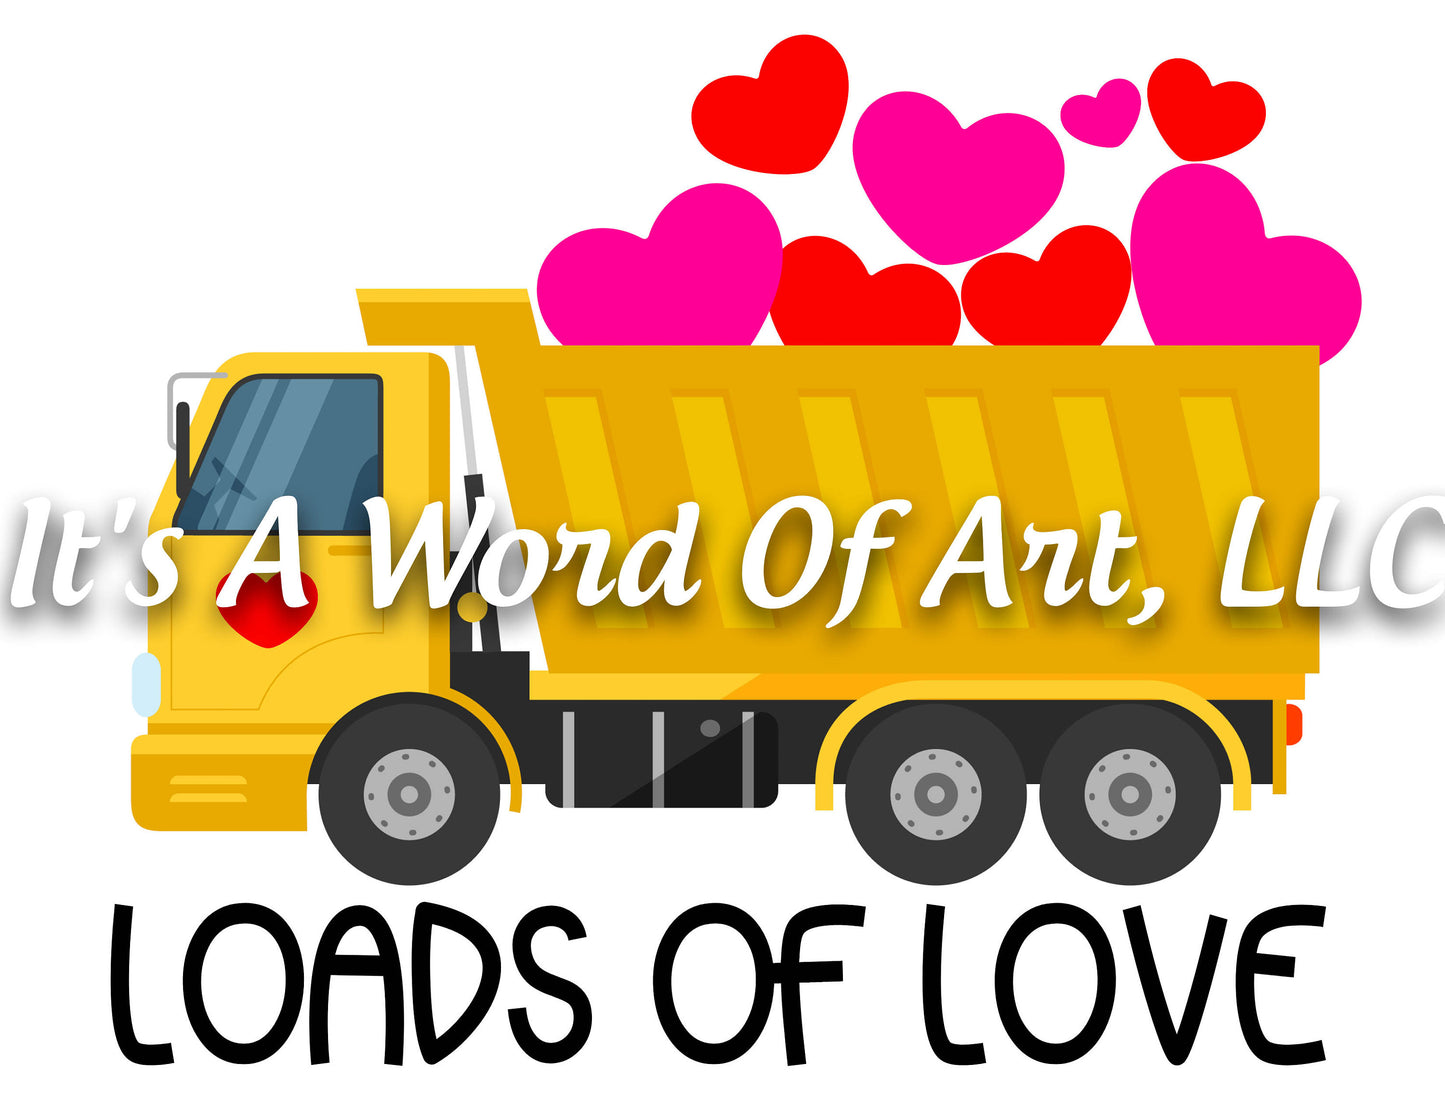 Valentines Day 93 - Loads of Love Dump Truck - Sublimation Transfer Set/Ready To Press Sublimation Transfer/Sublimation Transfer